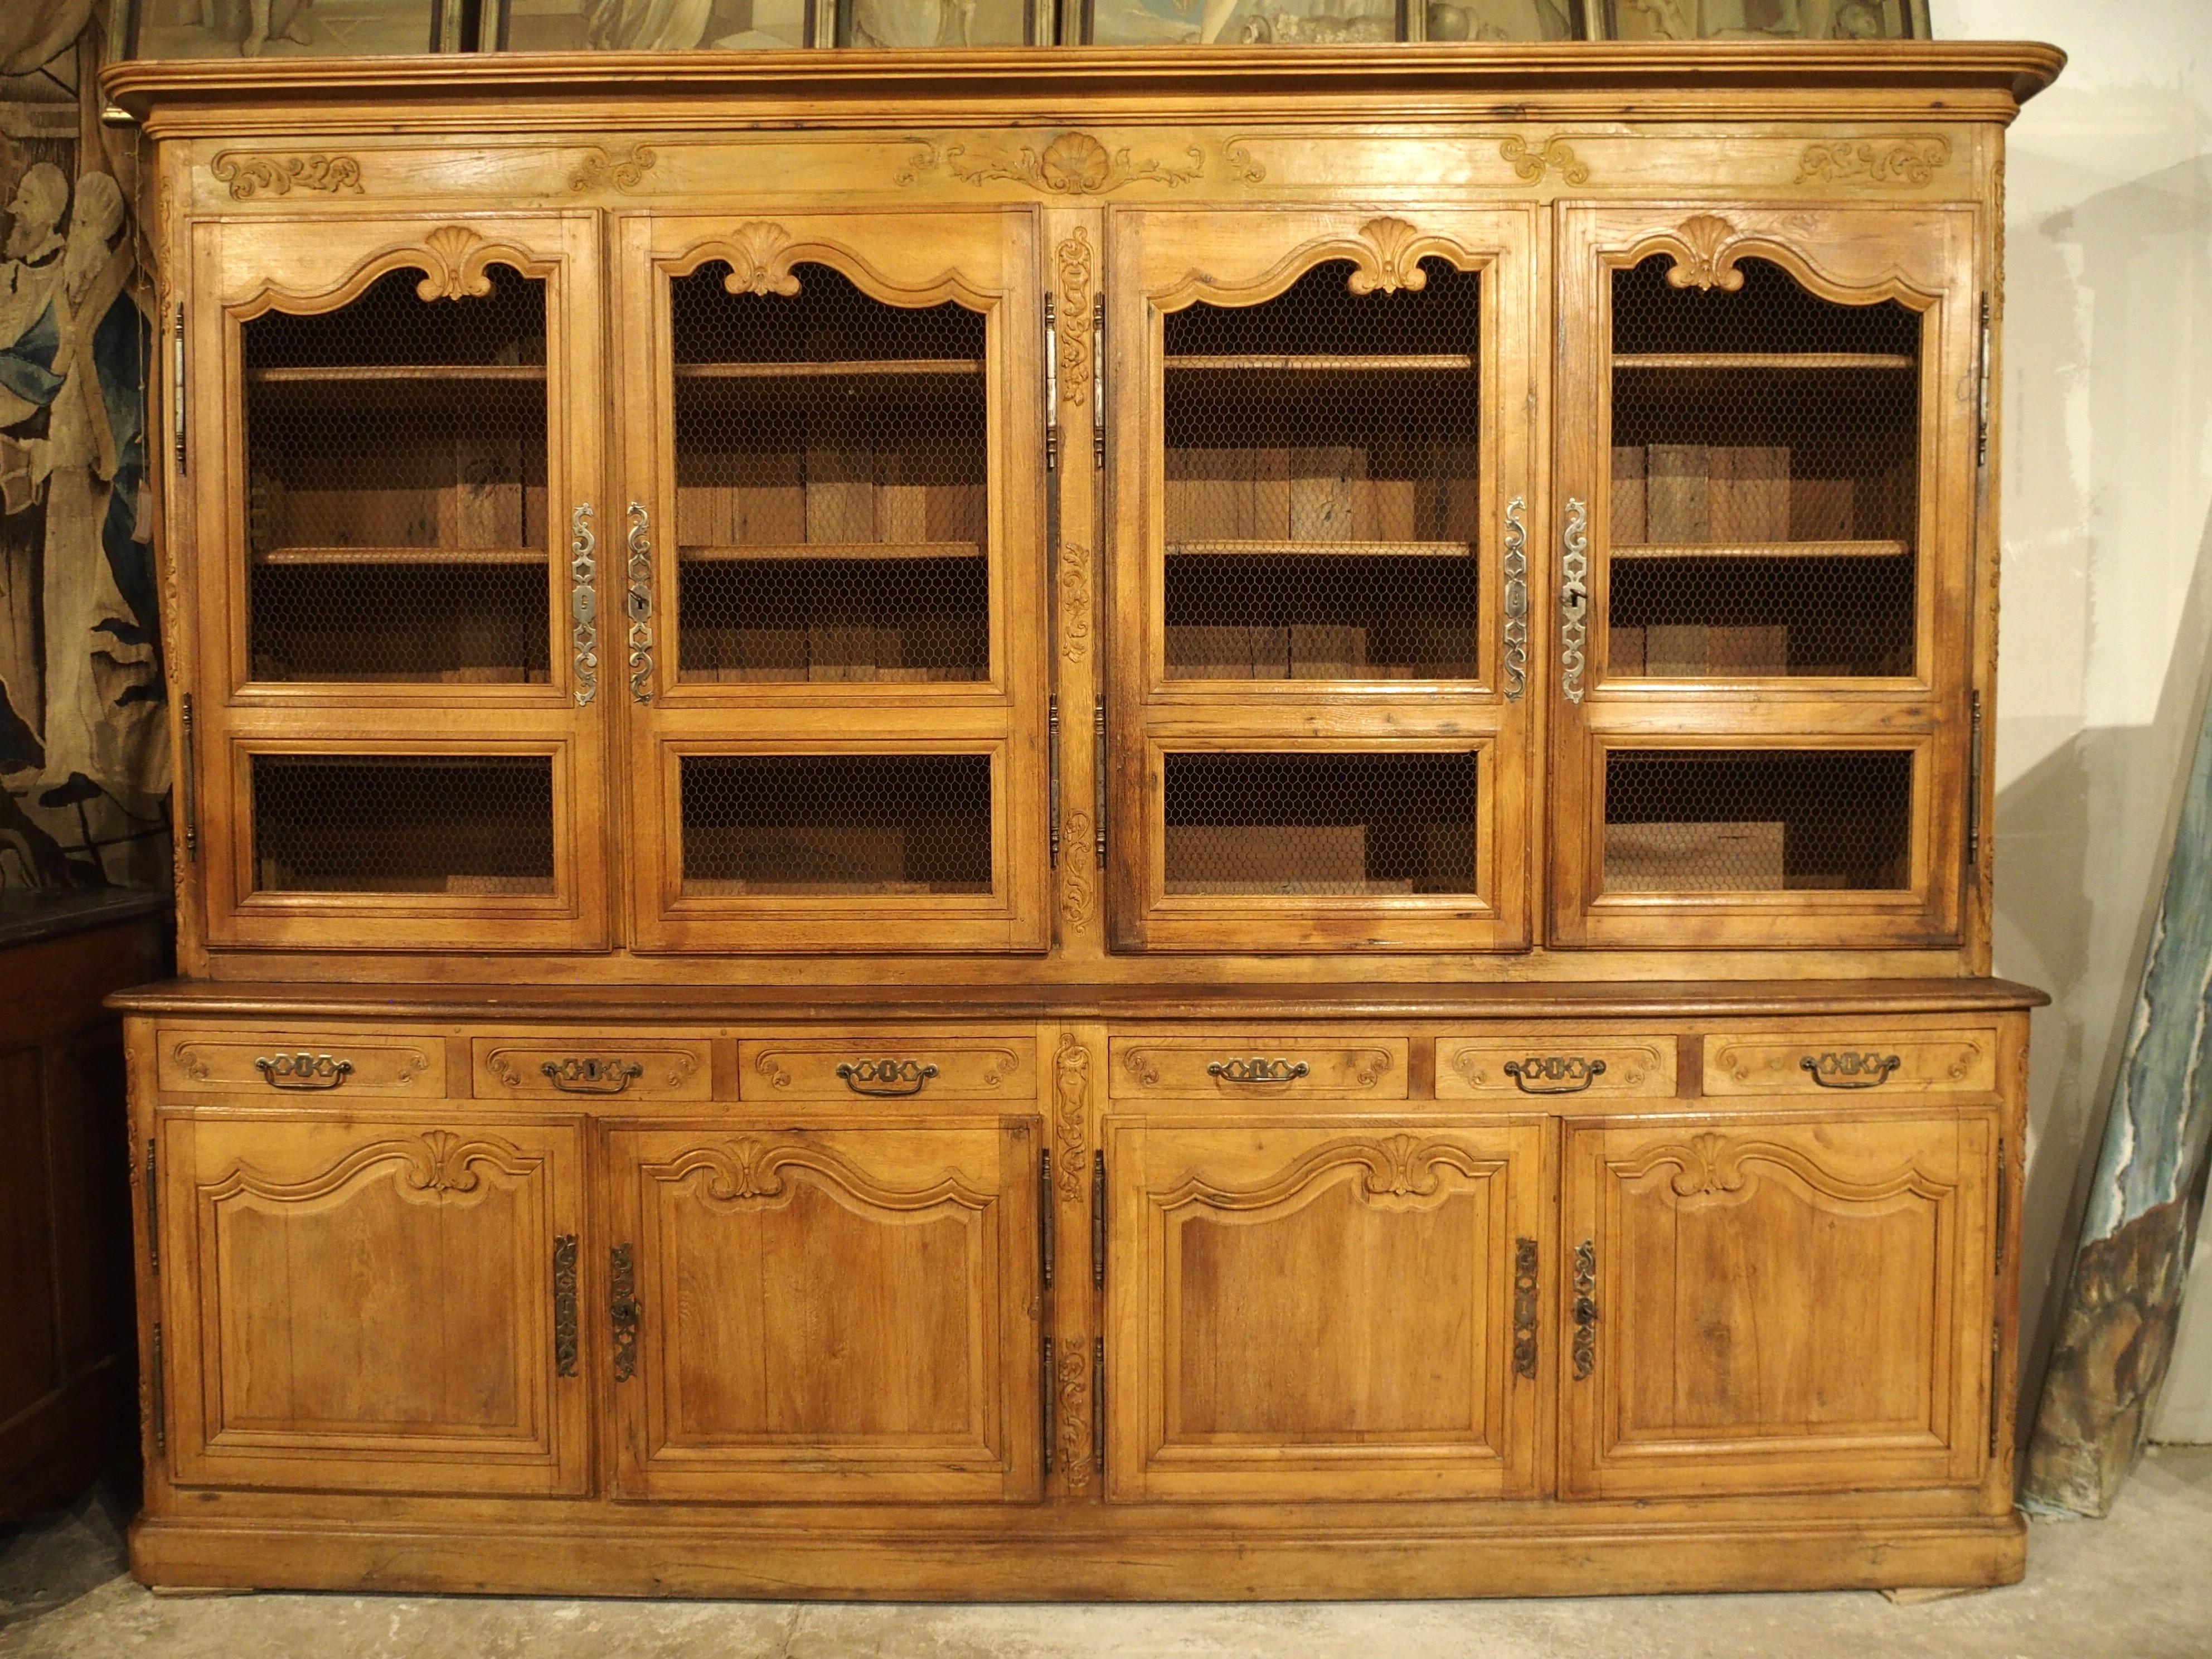 Circa 1800 Carved Oak and Wire Paneled Double Bibliothèque from Southwest France For Sale 14